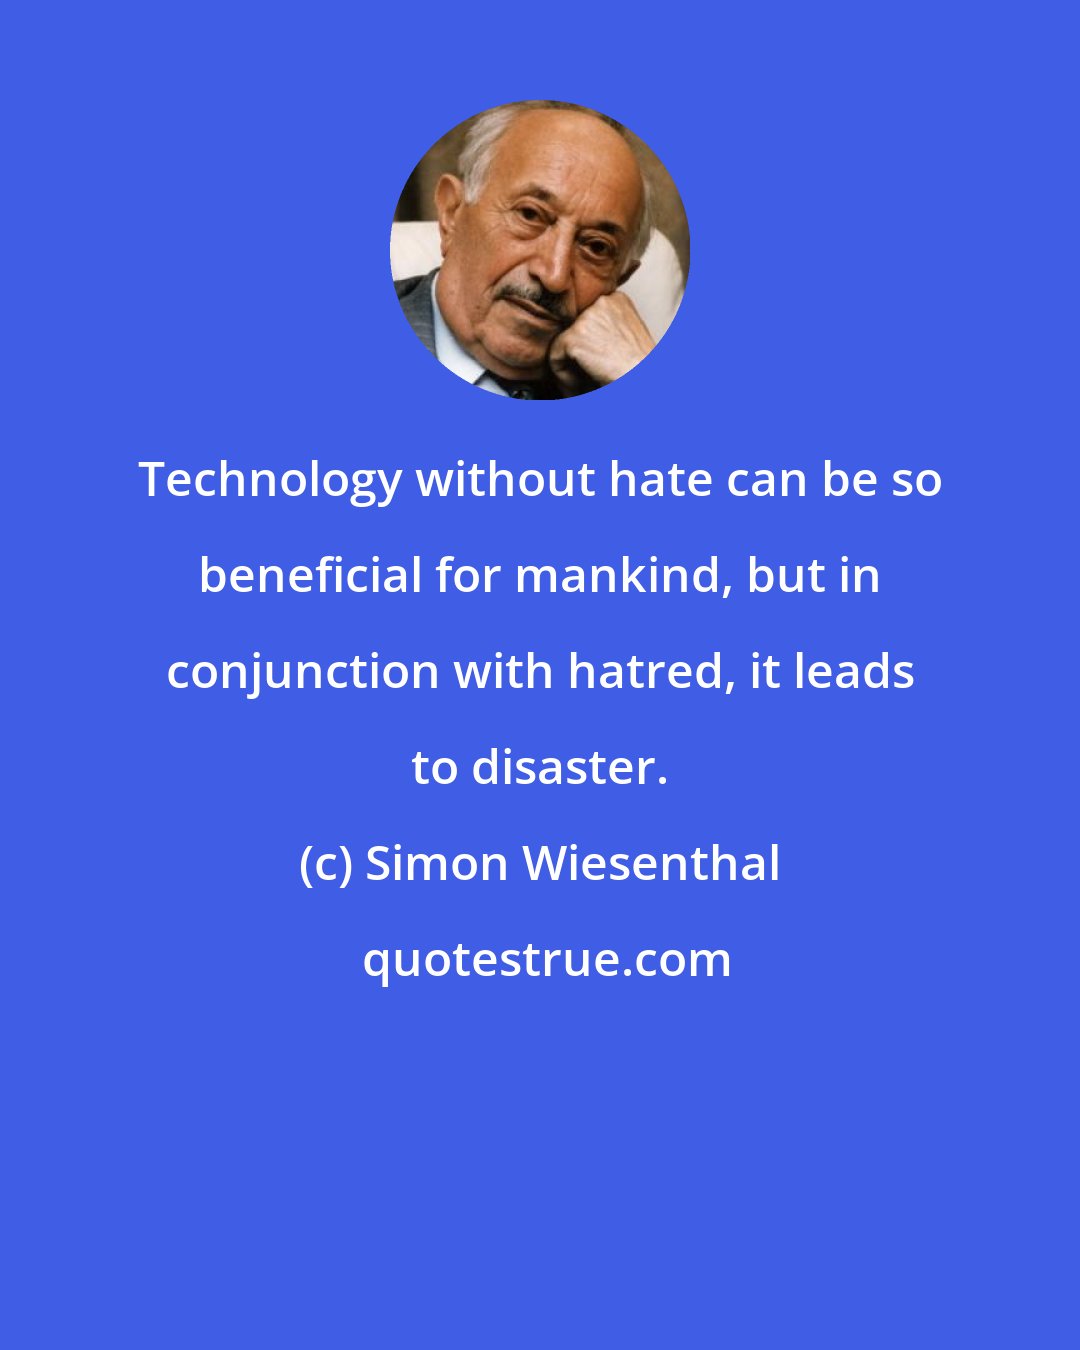 Simon Wiesenthal: Technology without hate can be so beneficial for mankind, but in conjunction with hatred, it leads to disaster.